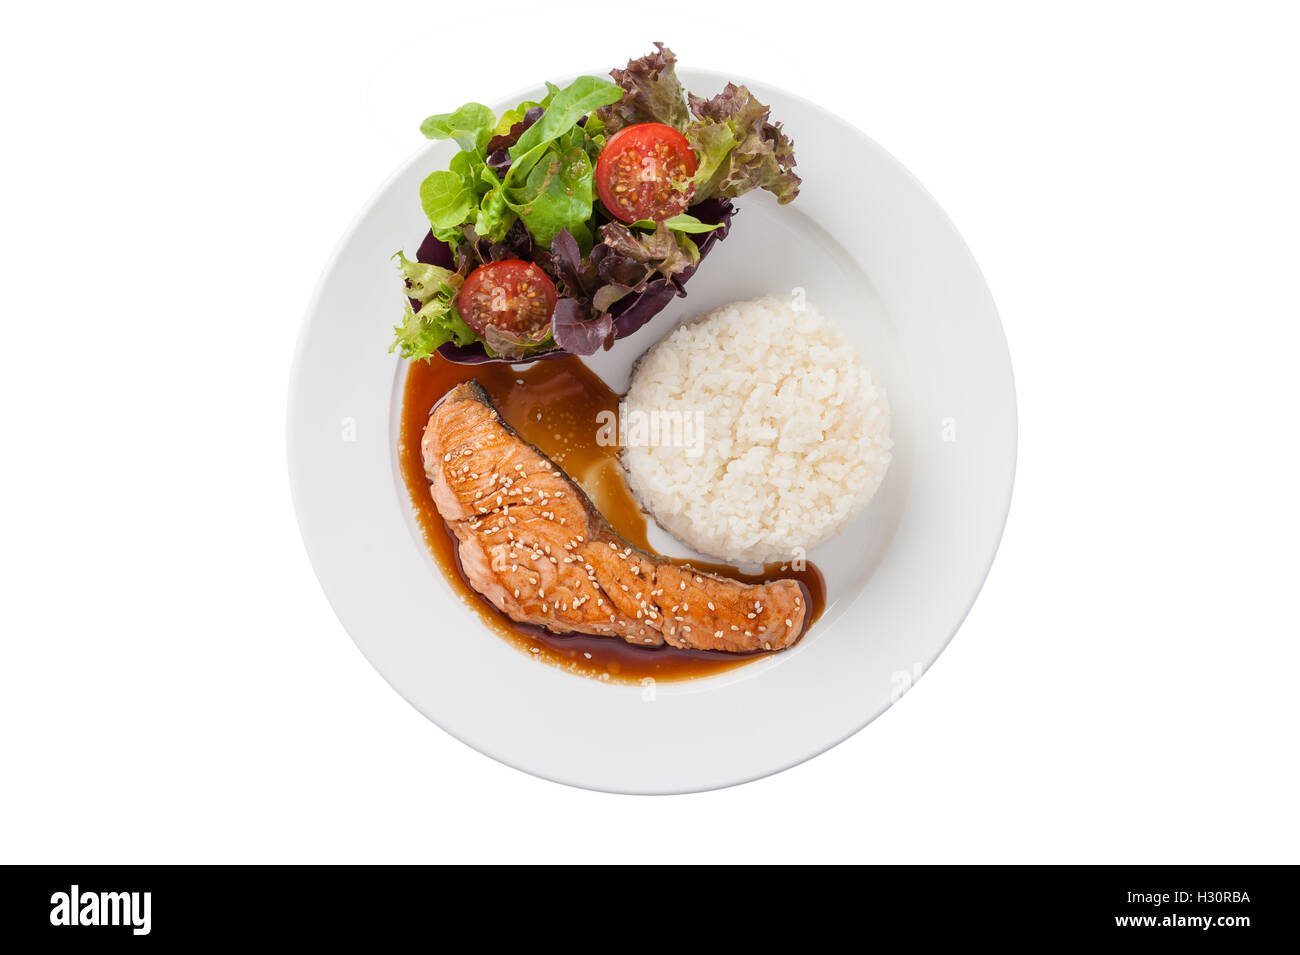 Top view of Fusion food style grilled salmon dressed with Japanese sweet sauce (Teriyaki) including Thai rice garnished with veg Stock Photo